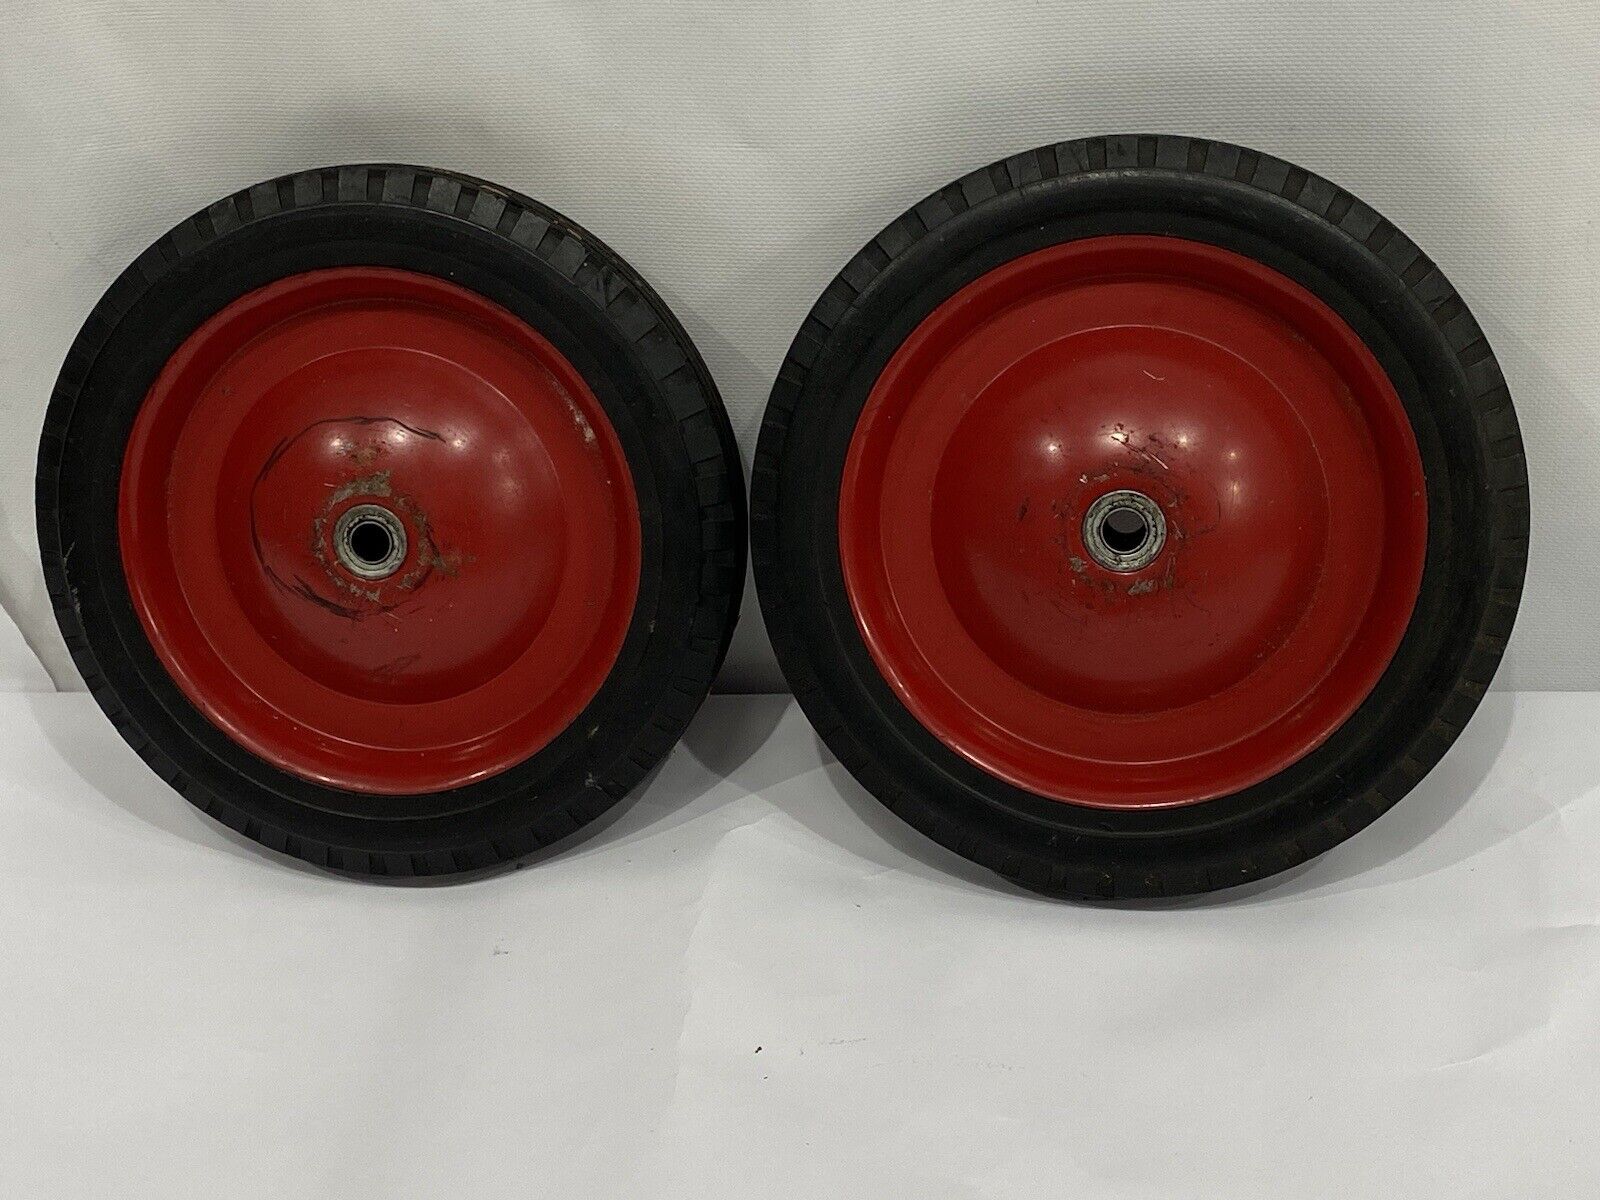 Set of 2 Original pedal car, trailer,wagon Wheels & Tires Rims with Rubber Pair